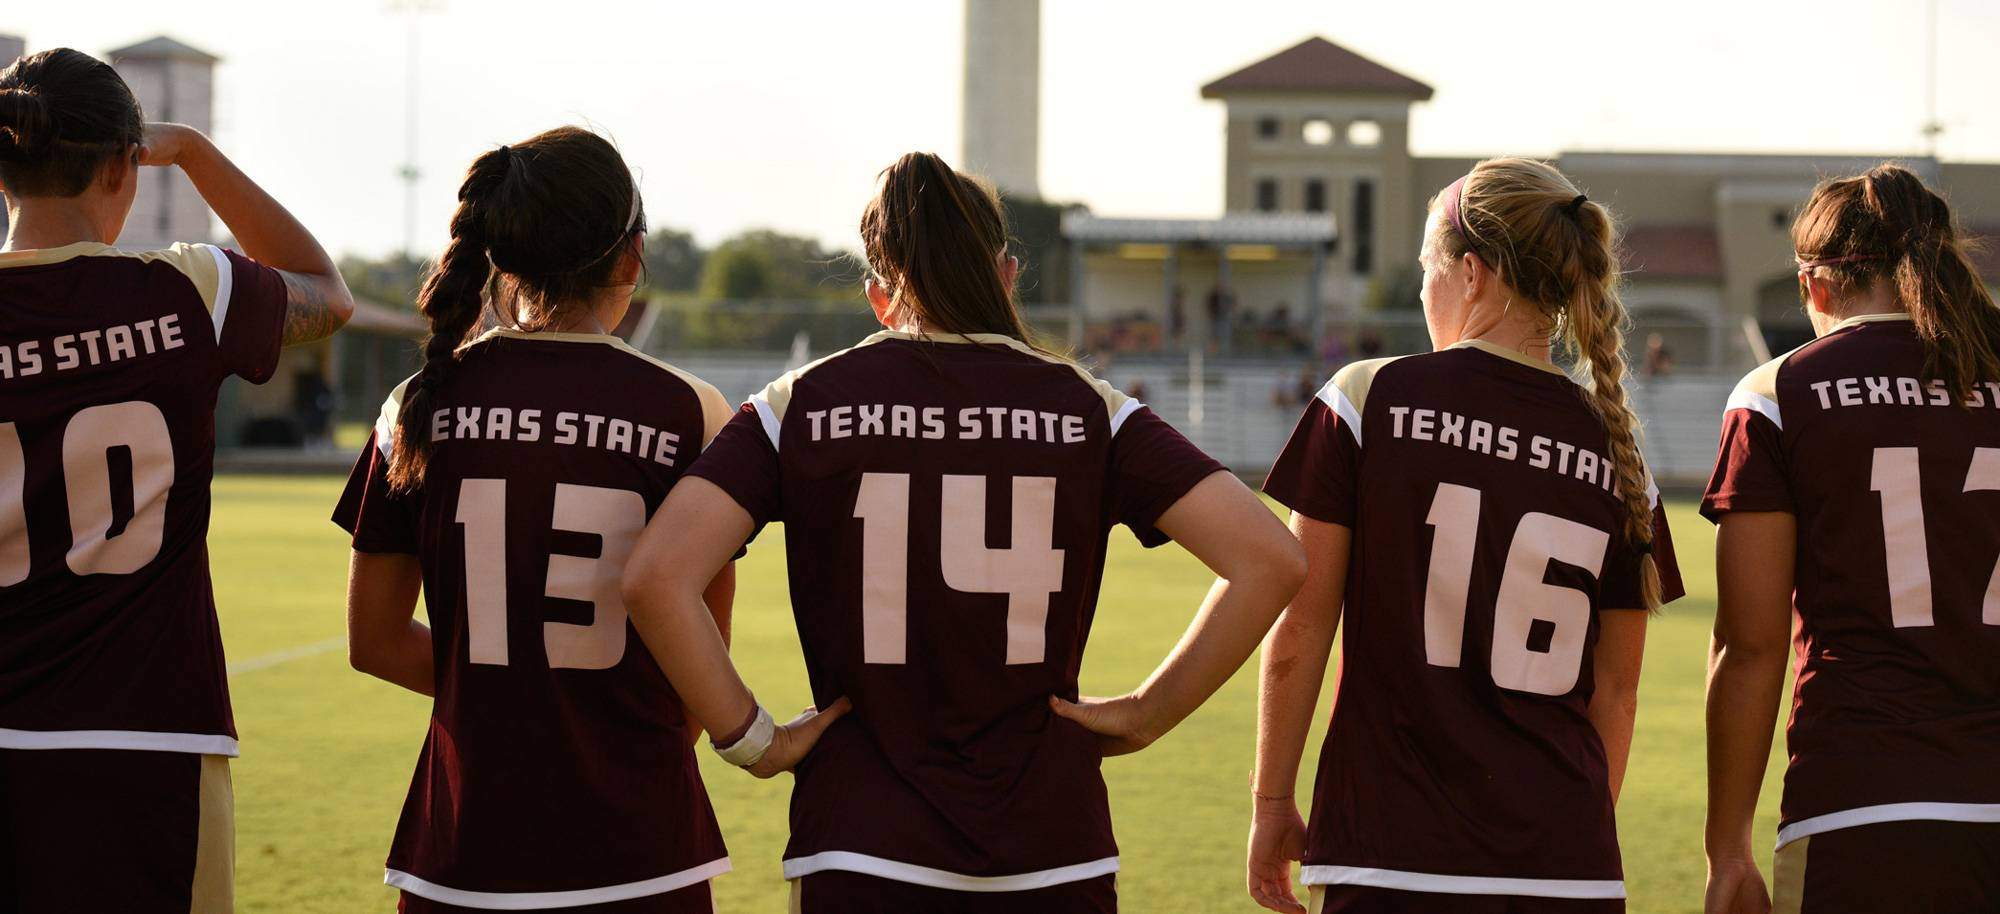 Five Women standing in soccer jerseys with the backs of jersey showing number 10,13,14,16,17